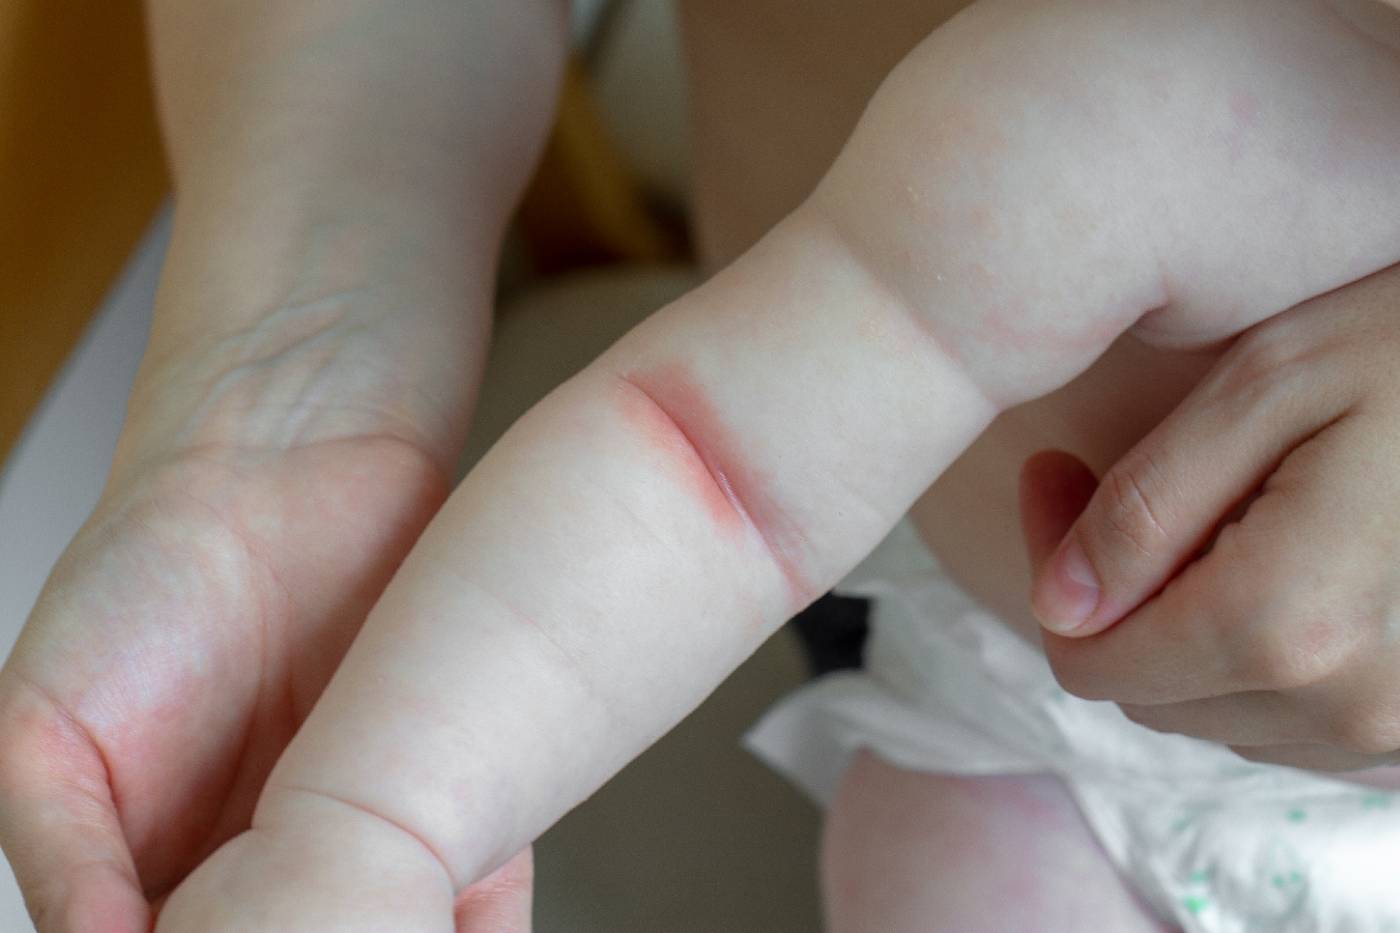 3 tips to try for safely alleviating red marks on baby's neck. Never p